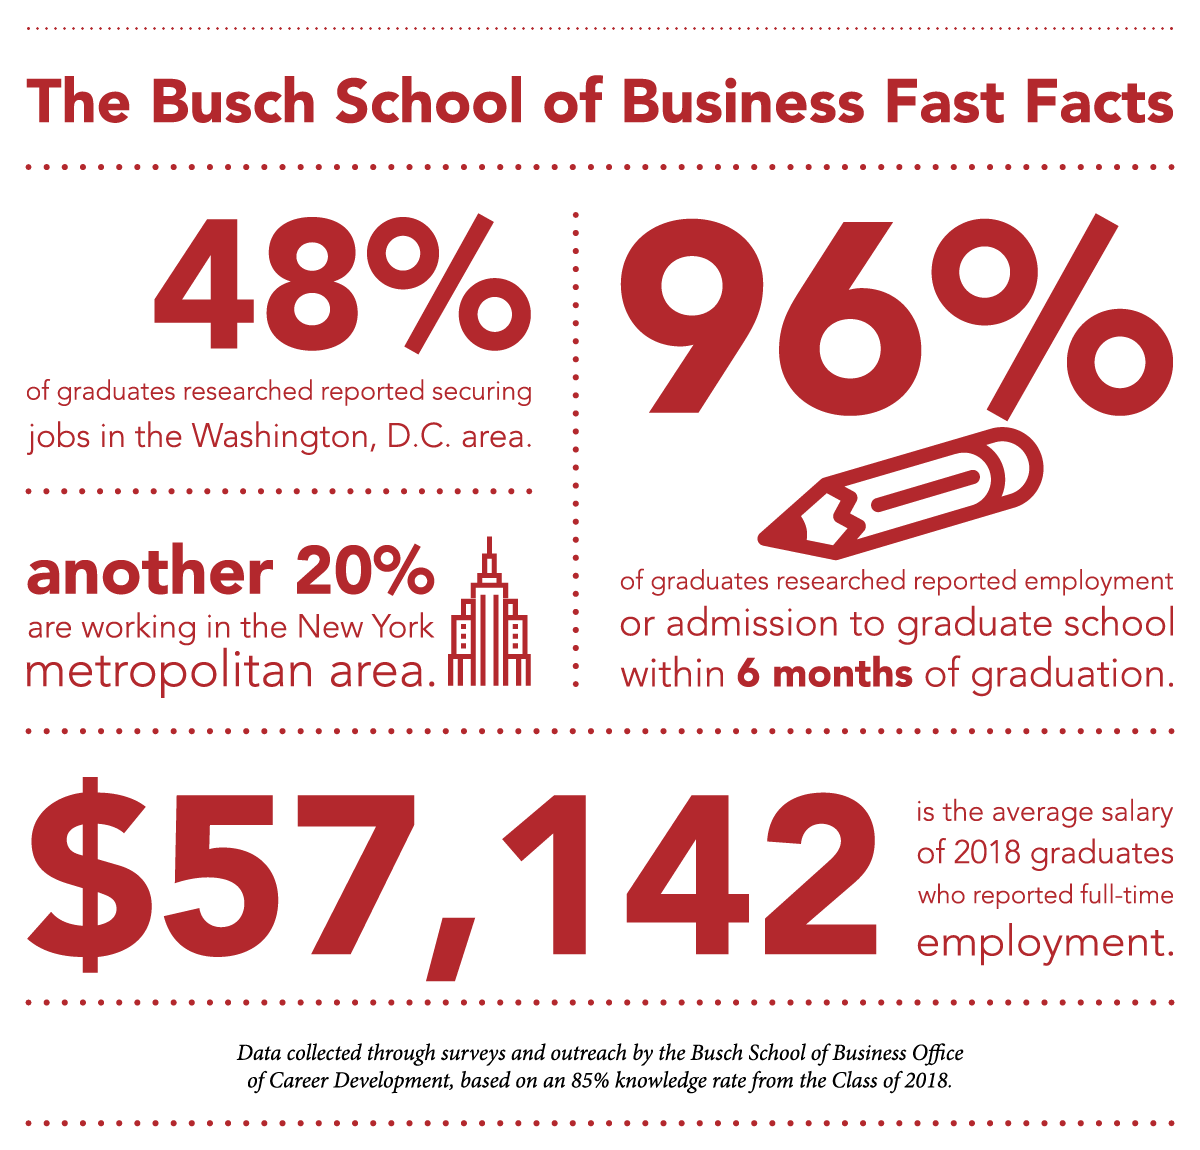 The Busch School of Business Fast Facts. 48% of graduates secured jobs in the Washington, D.C. area. Another 20% are working in the New York metropolitan area. 96% of graduates reported employment or admission to graduate school within 6 months of graduation. $57,142 is the average salary of 2018 graduates who reported full-time employment. Data collected through surveys and outreach by the Busch School of Business Office of Career Development, based on an 85% knowledge rate from the Class of 2018. 